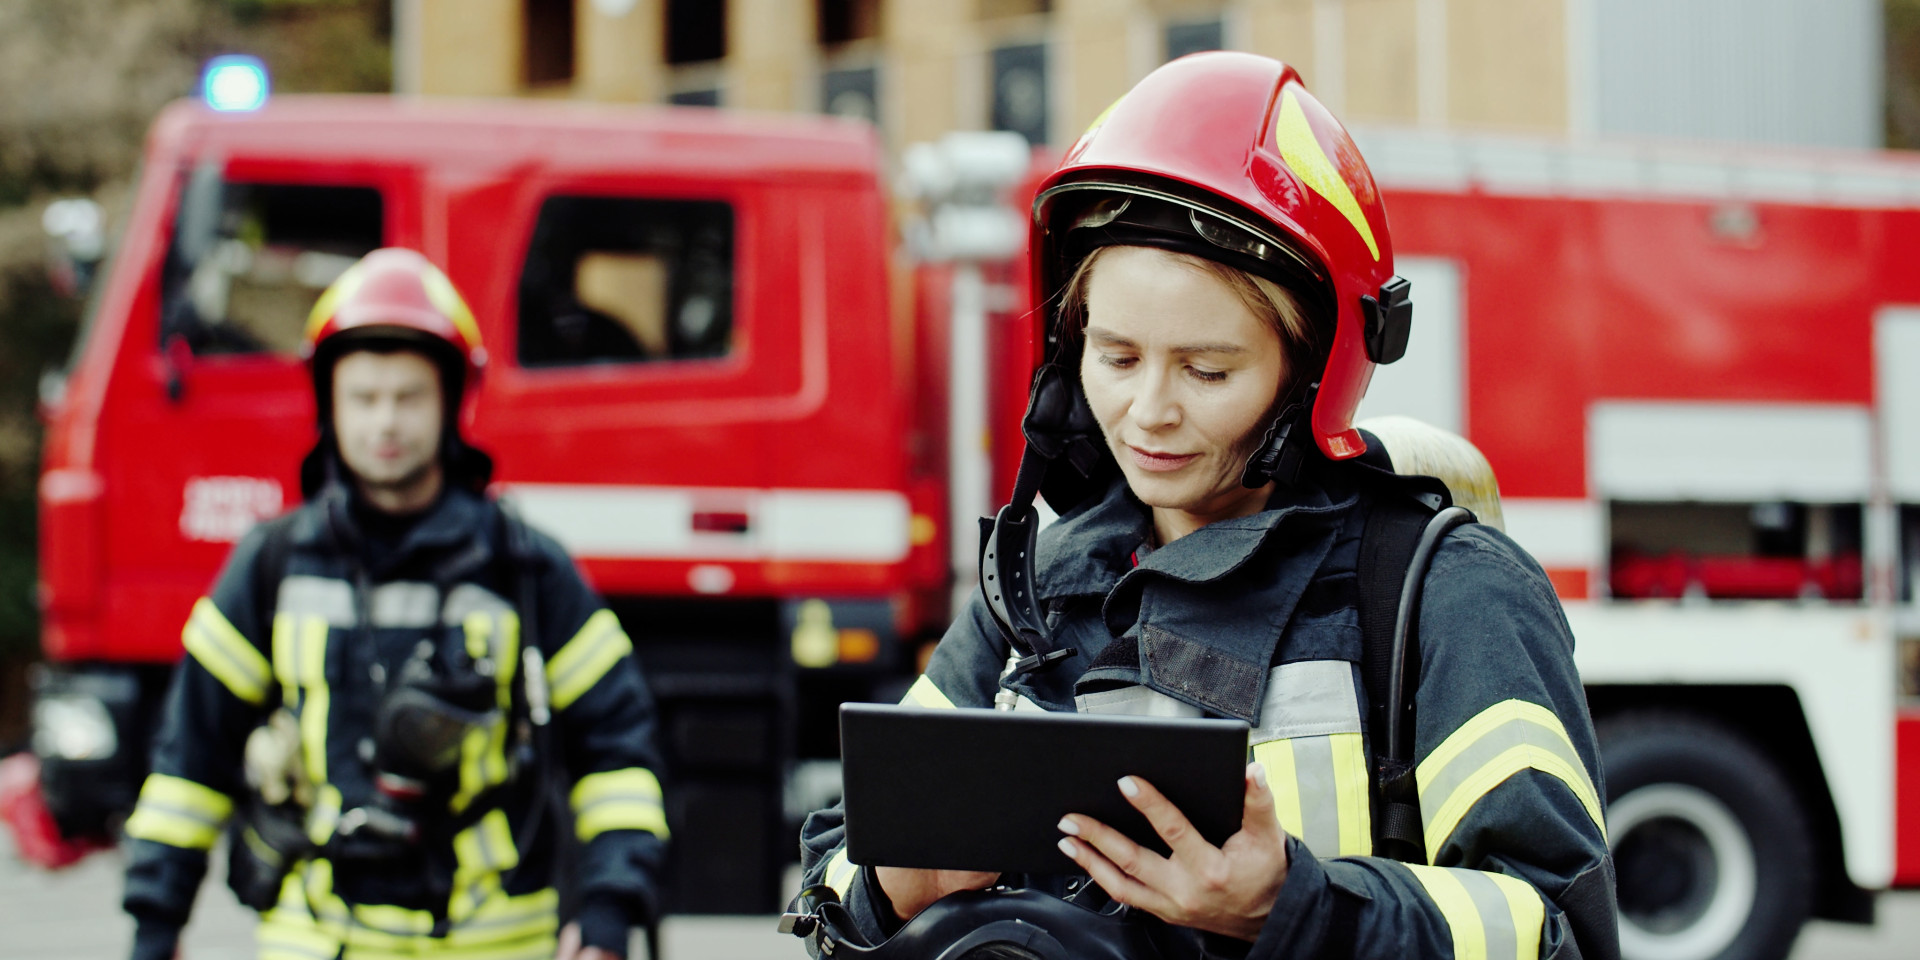 Fire officer with ipad